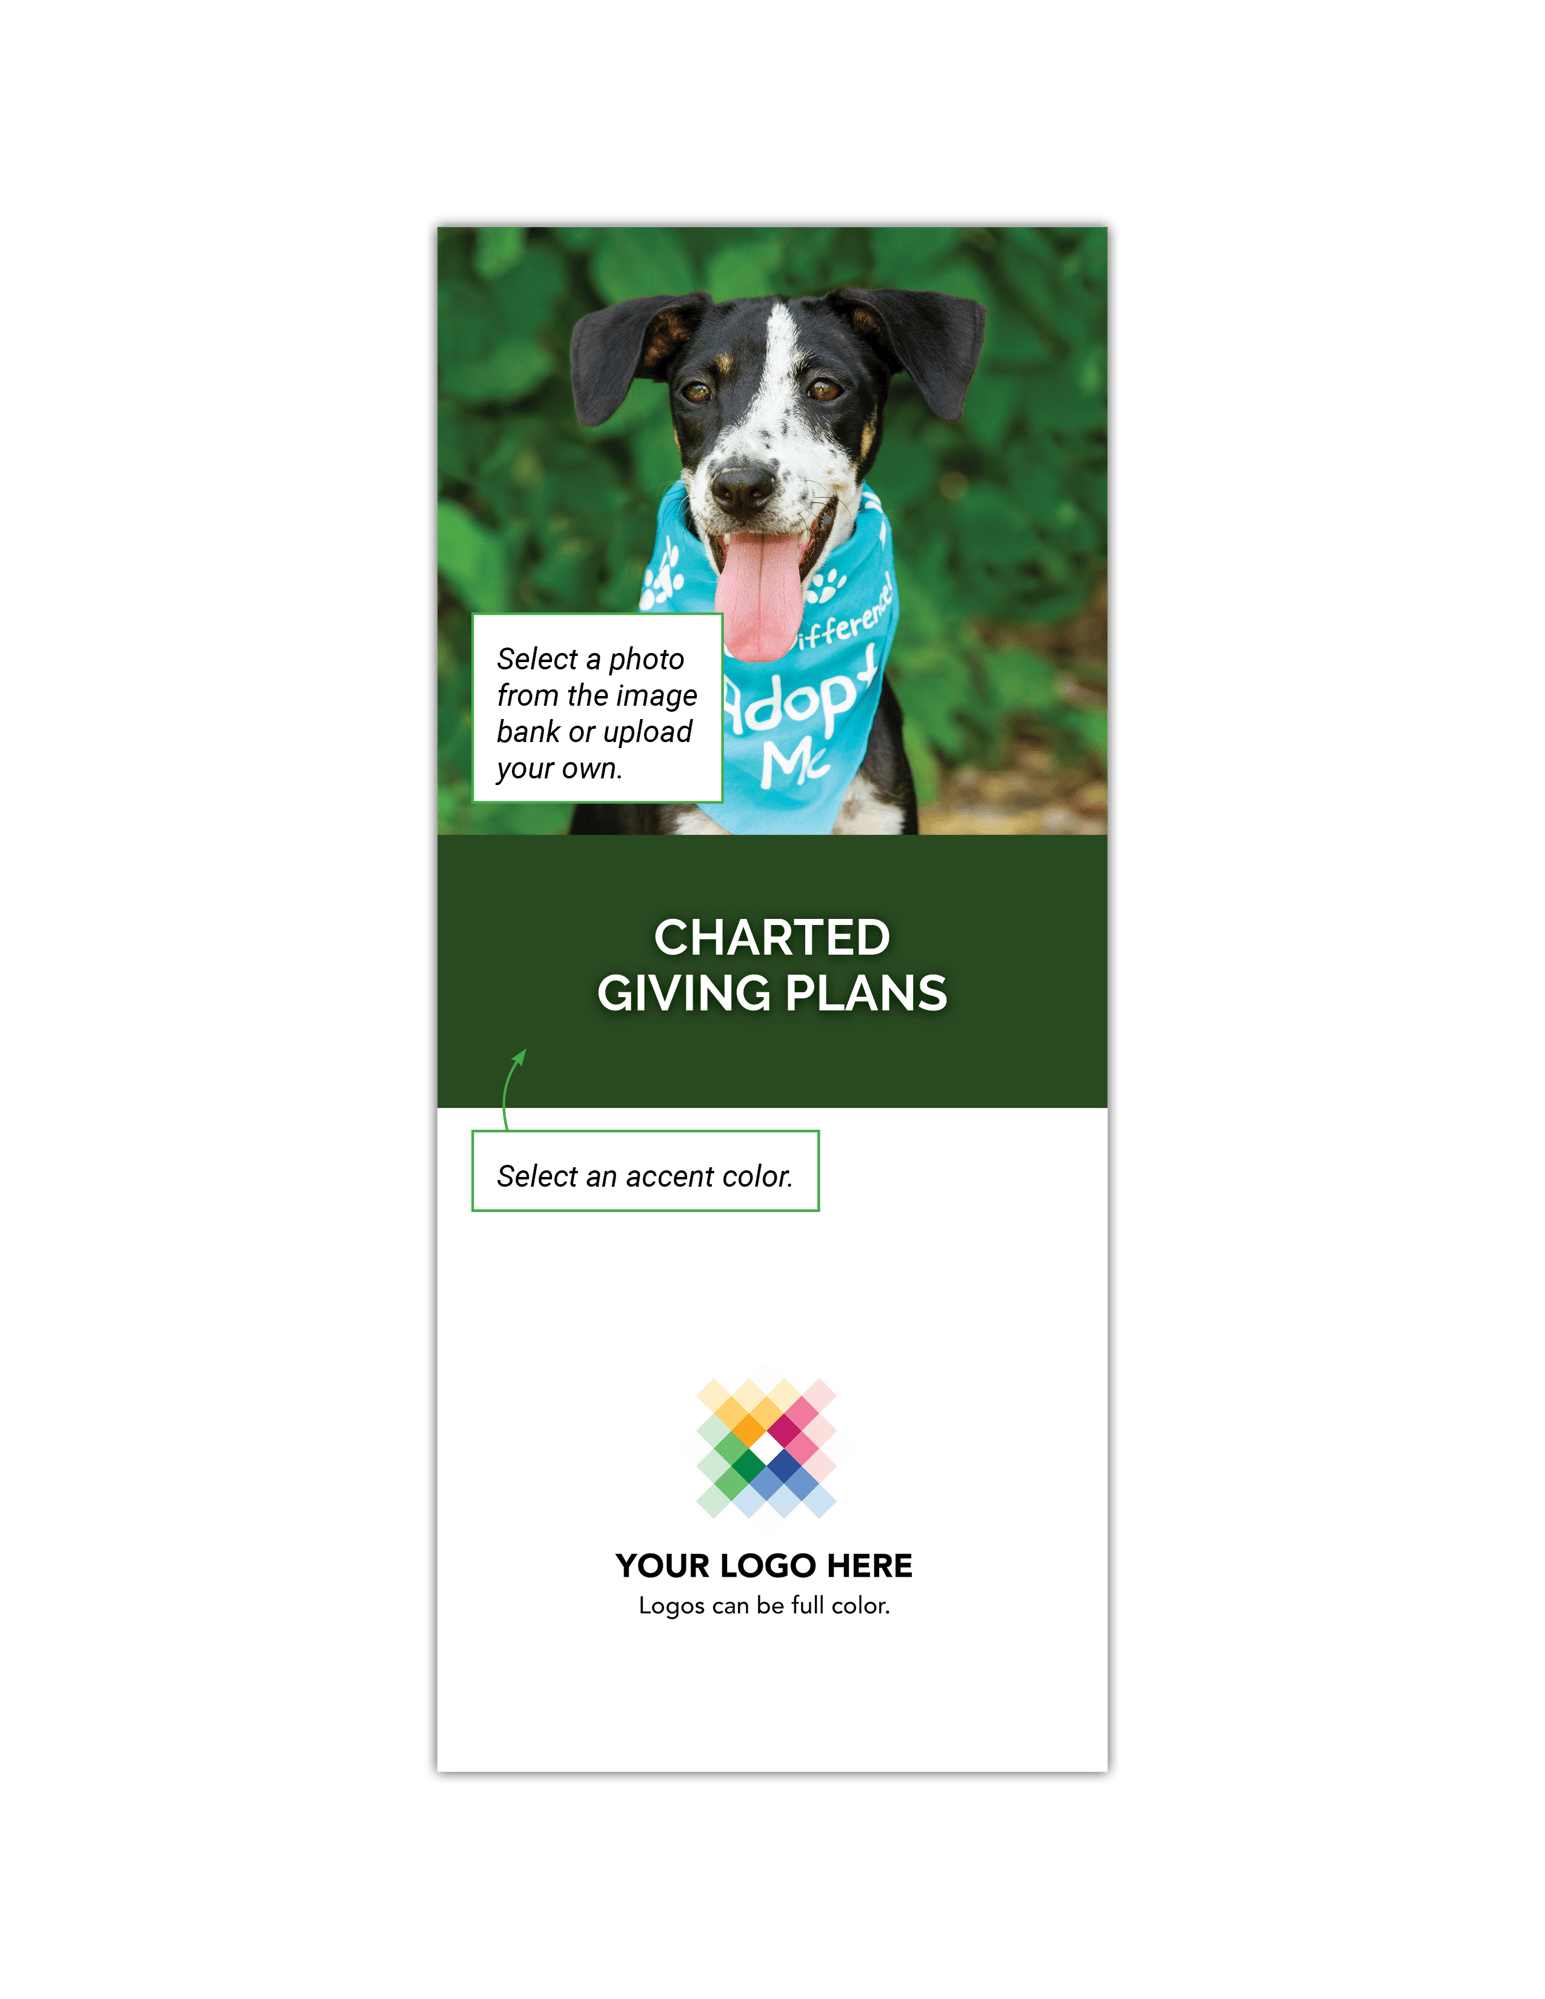 Charted Giving Giving Plans Cover- Animal mission